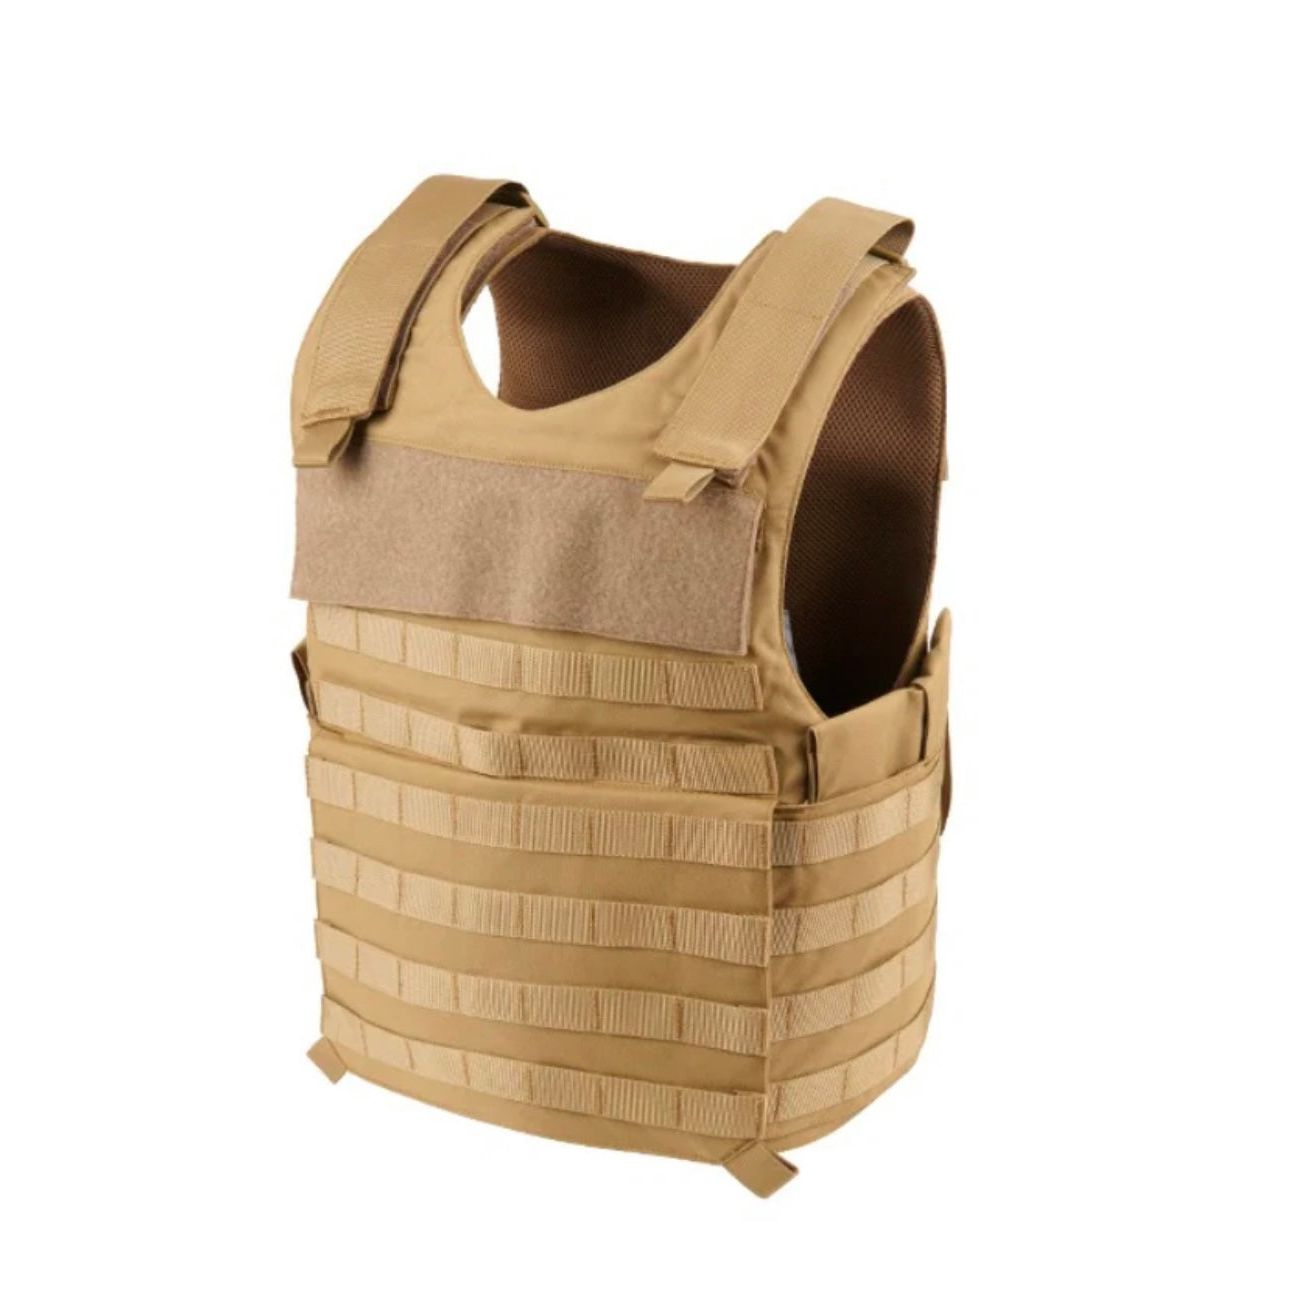 Ballistic protective vest CEST 1.1 - with Molle system